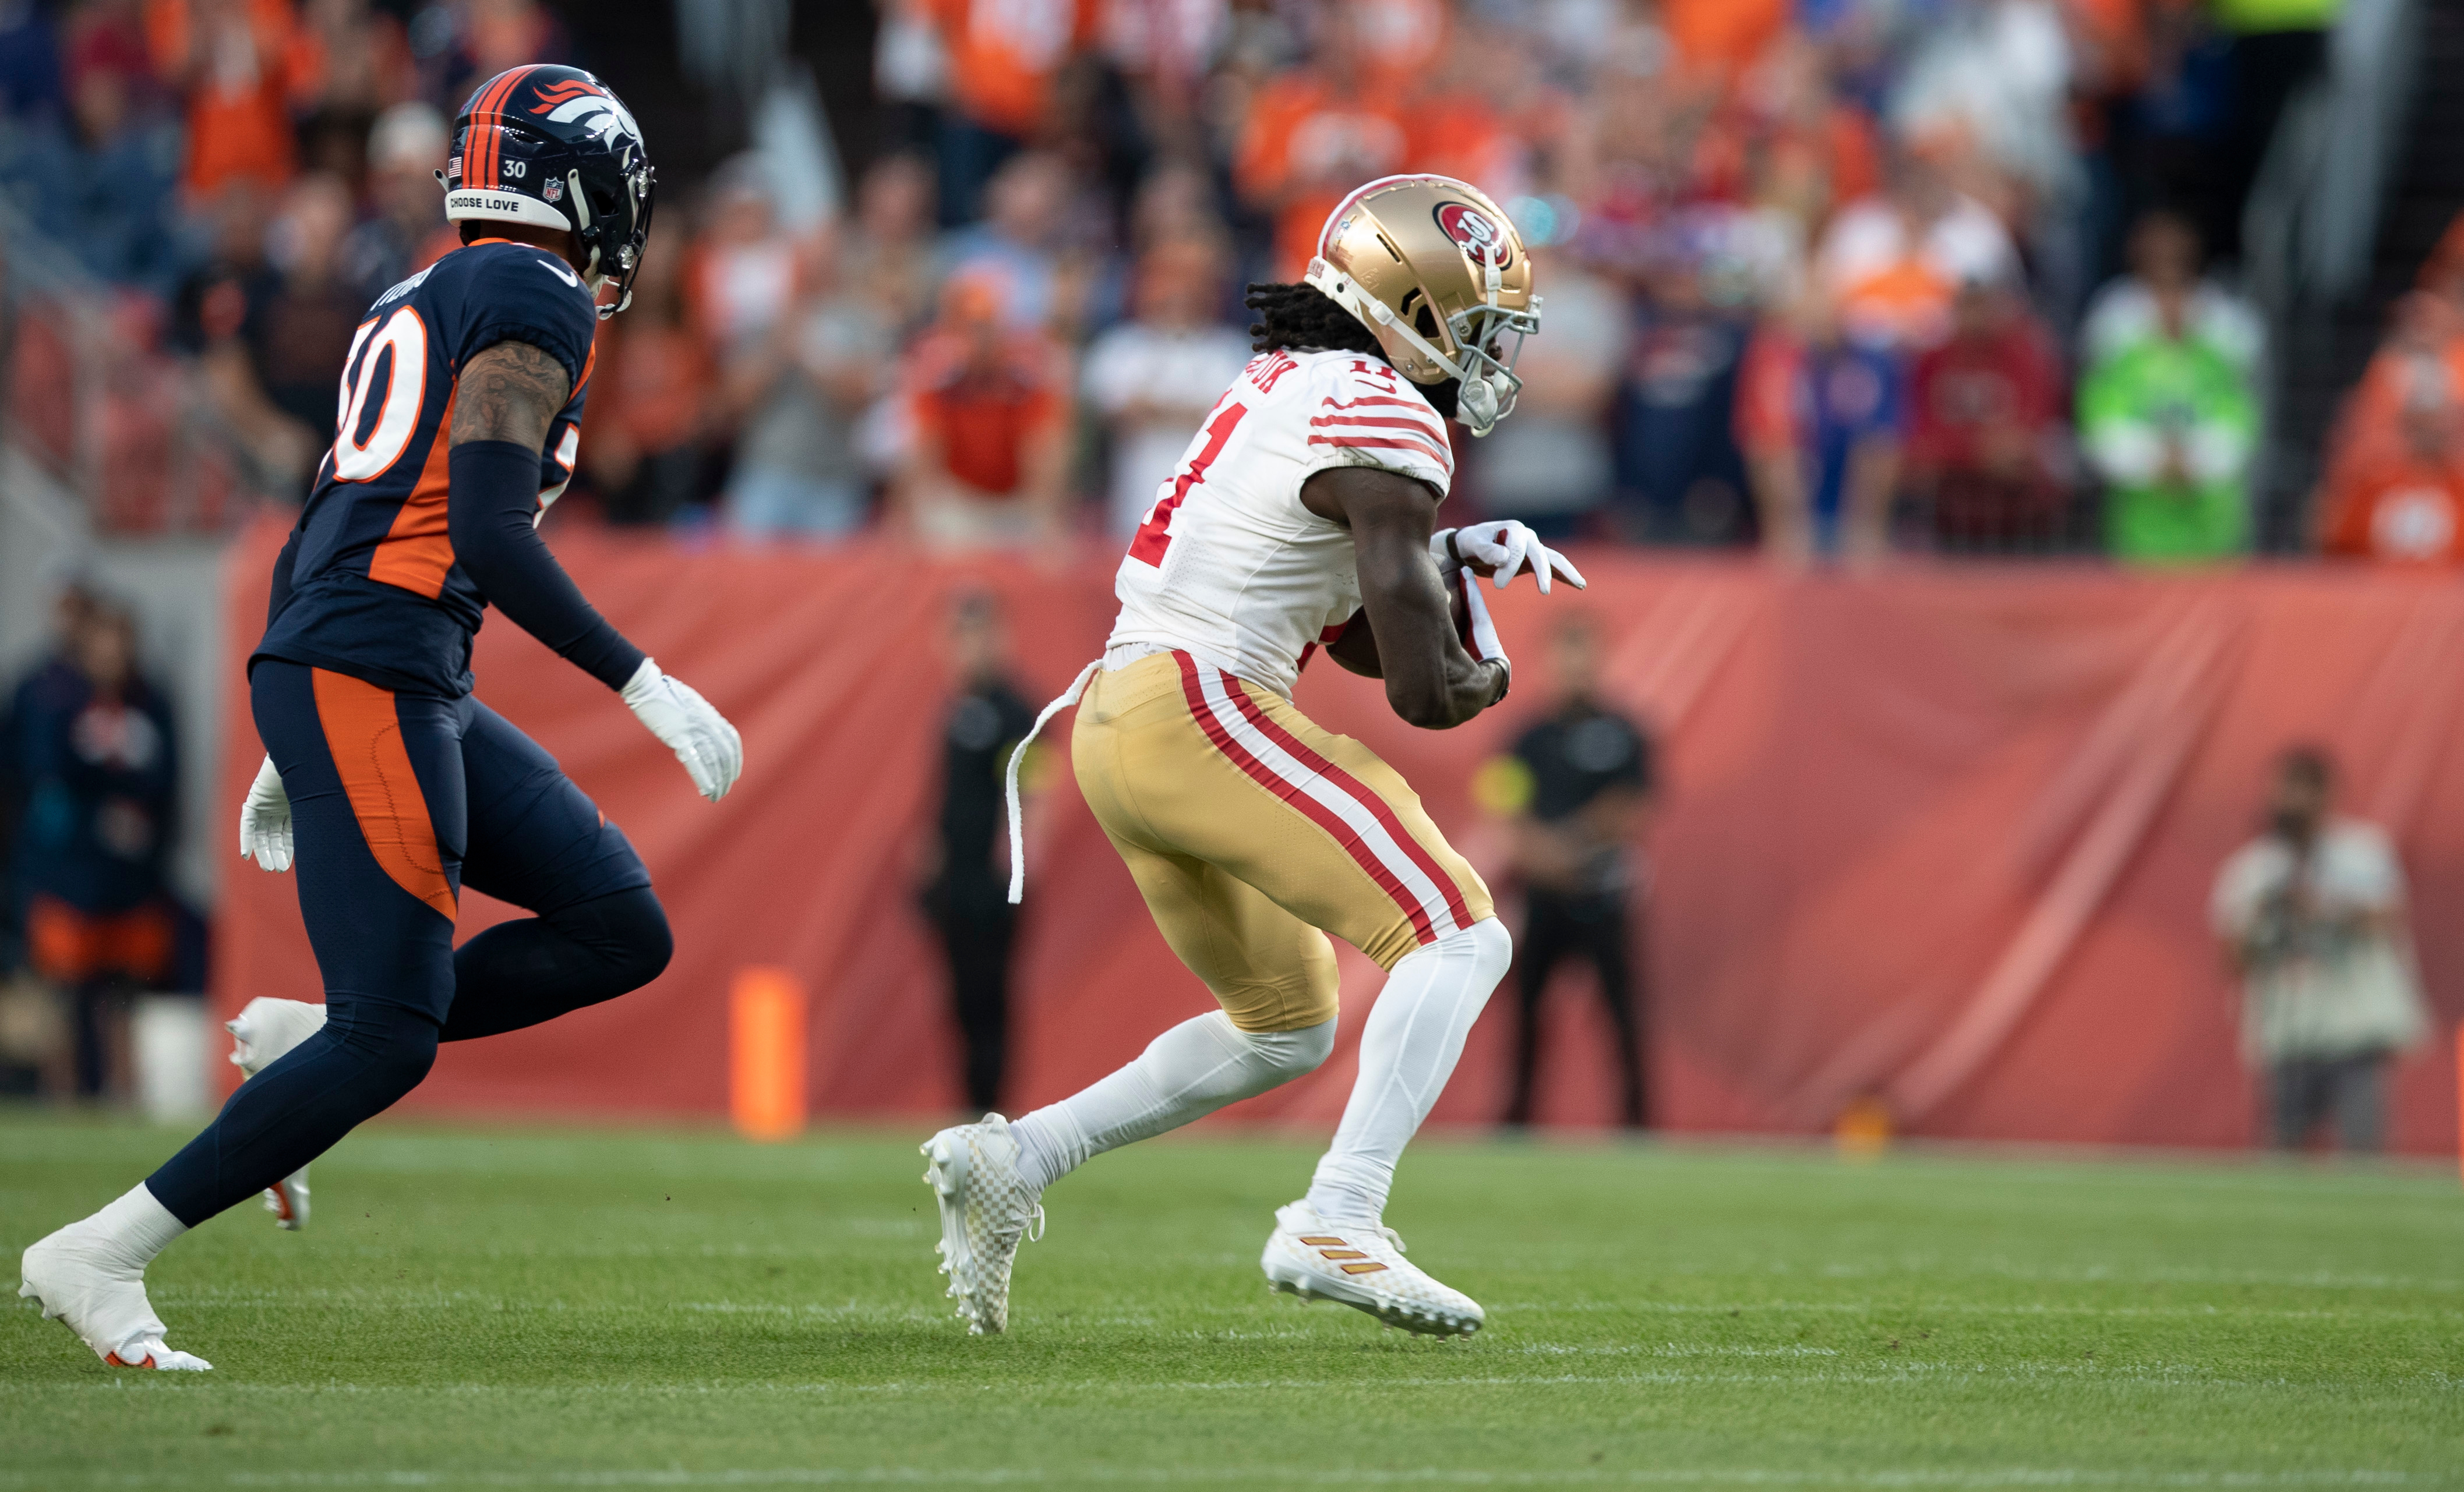 Brandon Aiyuk #11 of the San Francisco 49ers runs after making a catch during the game against the Denver Broncos at Empower Field At Mile High on September 25, 2022 in Denver, Colorado.